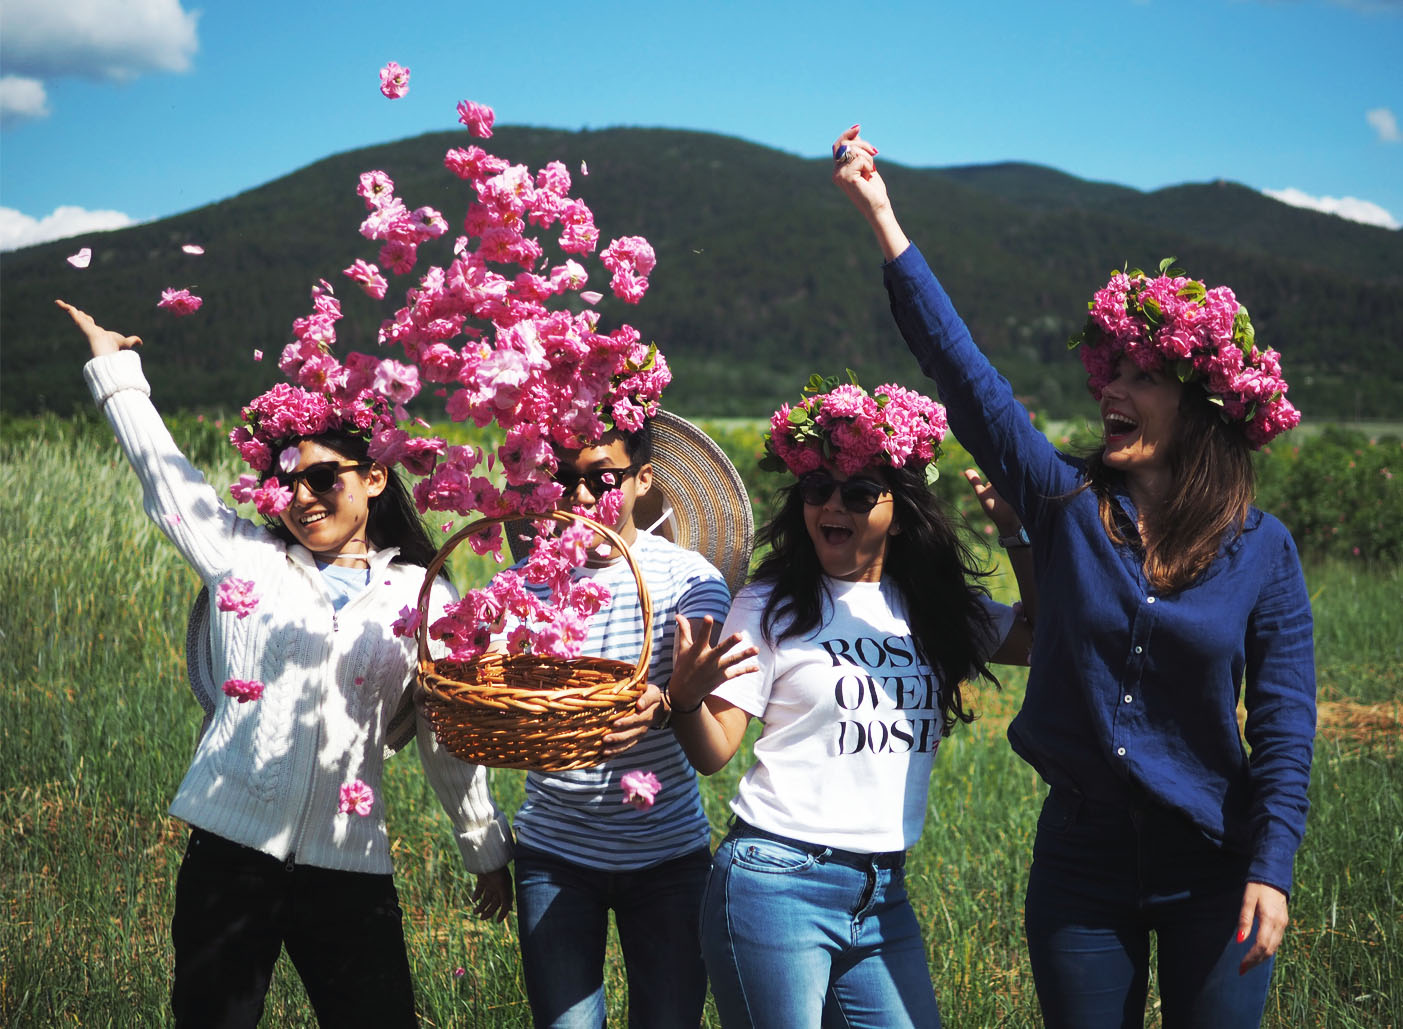 DISCOVER THE BEAUTY OF ROSE PICKING AND OIL PRODUCTION CUSTOMS IN BULGARIA